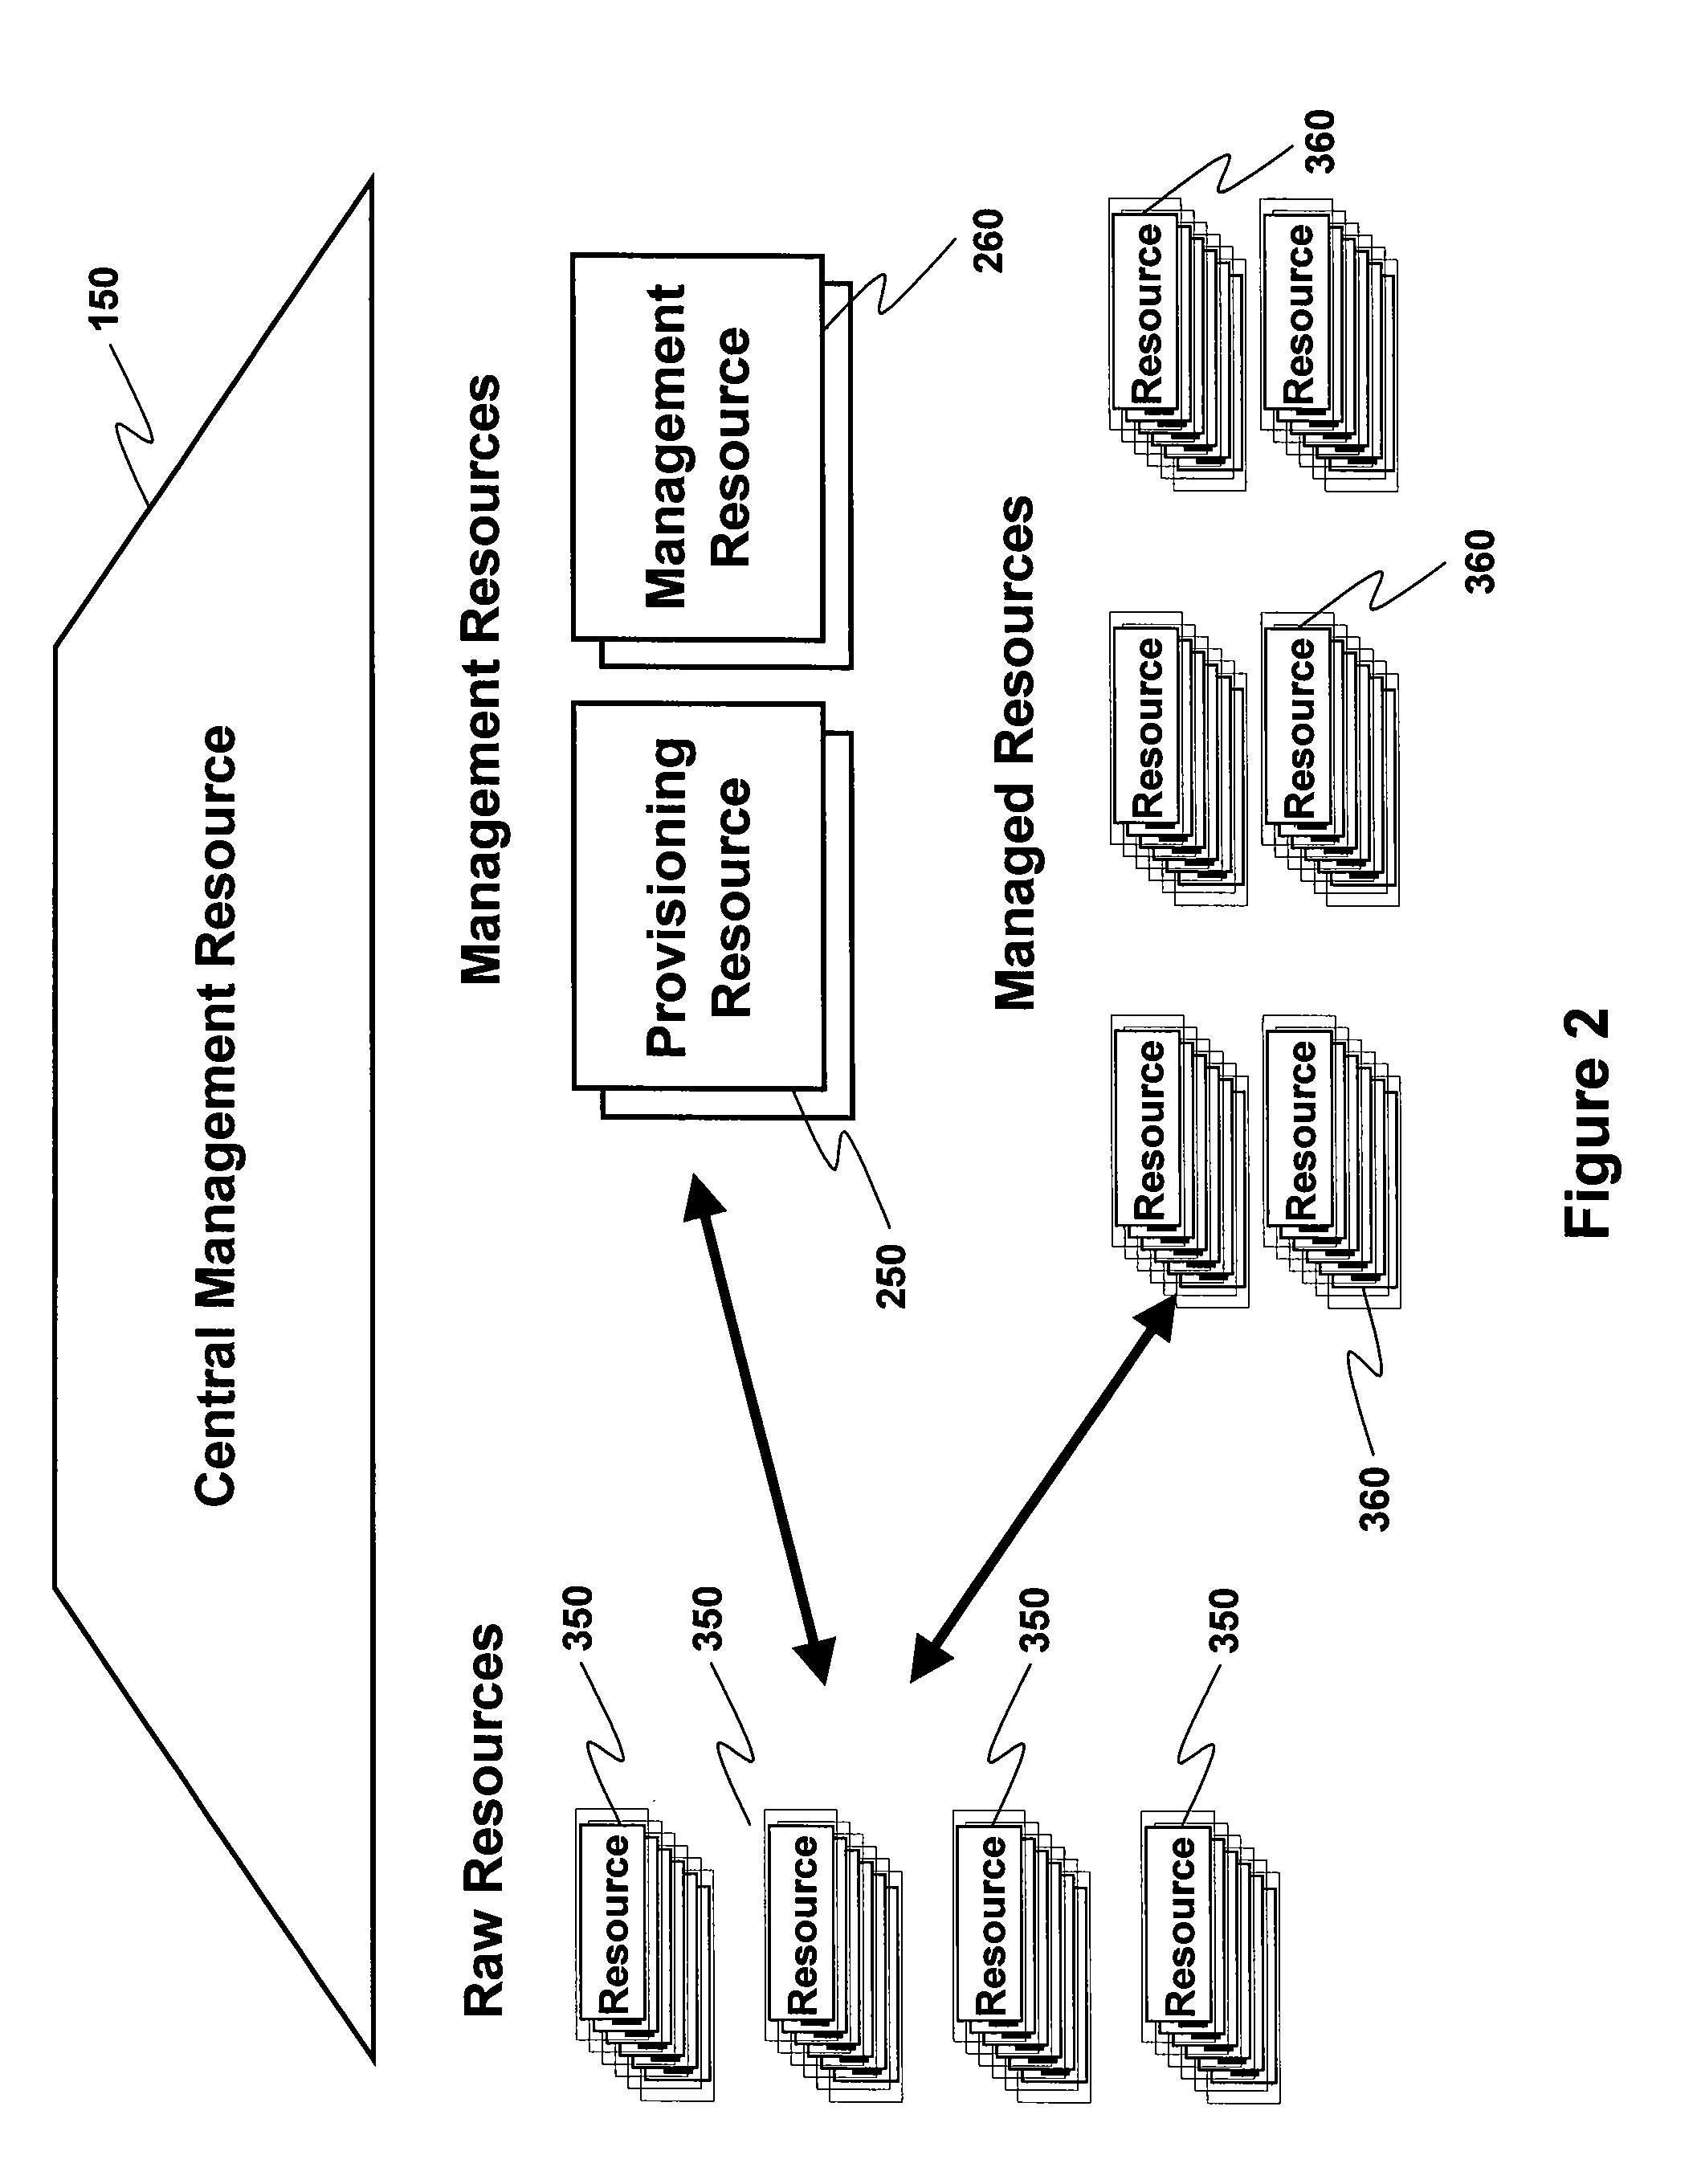 Method for dynamic information technology infrastructure provisioning